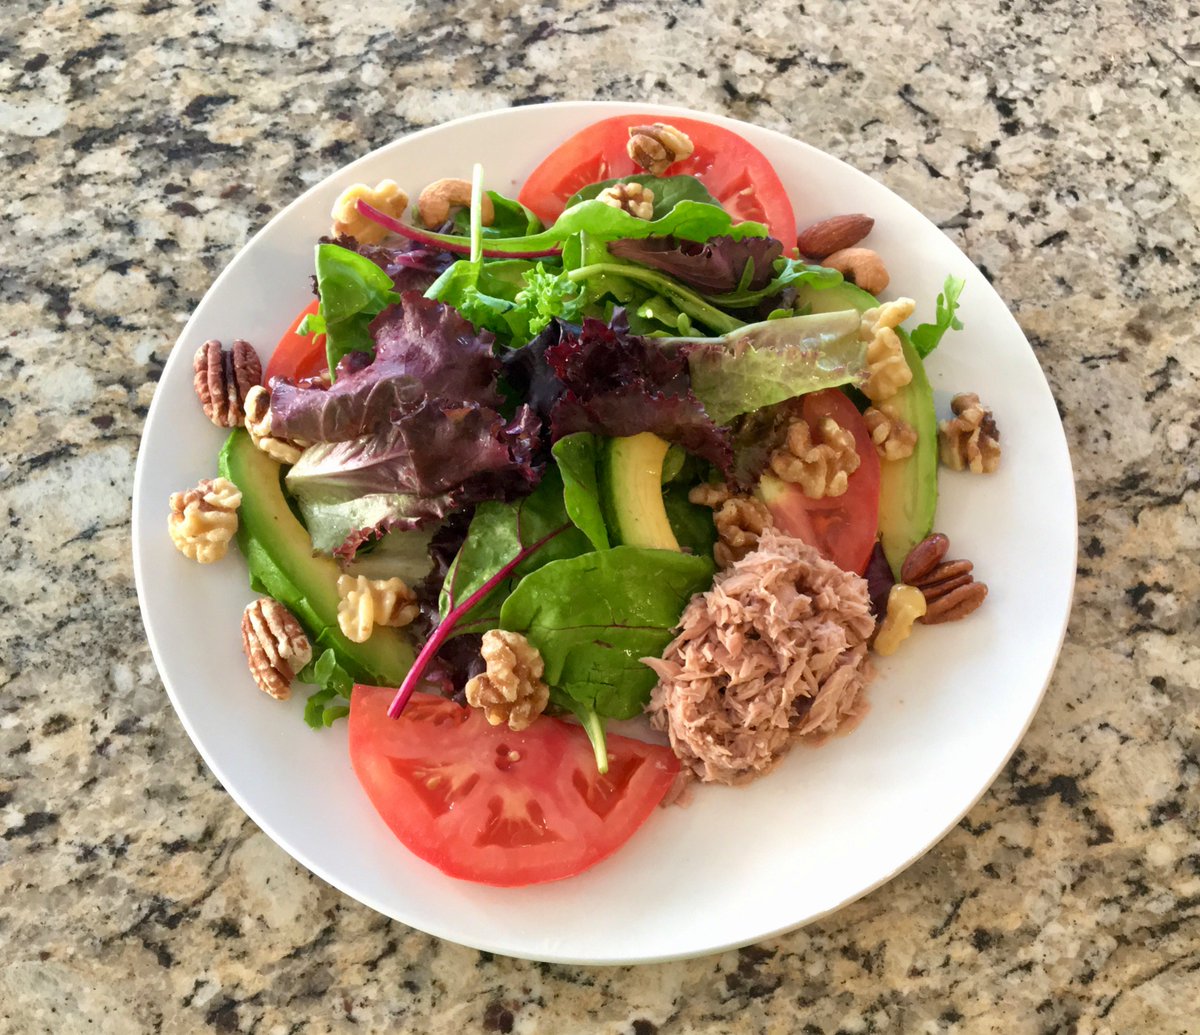 Tonight, I put together a mixed greens salad with avocado, tomato, nuts, and a side of tuna, topped with extra virgin olive oil. Enjoyed with a glass of 2019 Bocelli Toscana Sangiovese. 🍷

#MediterraneanDiet